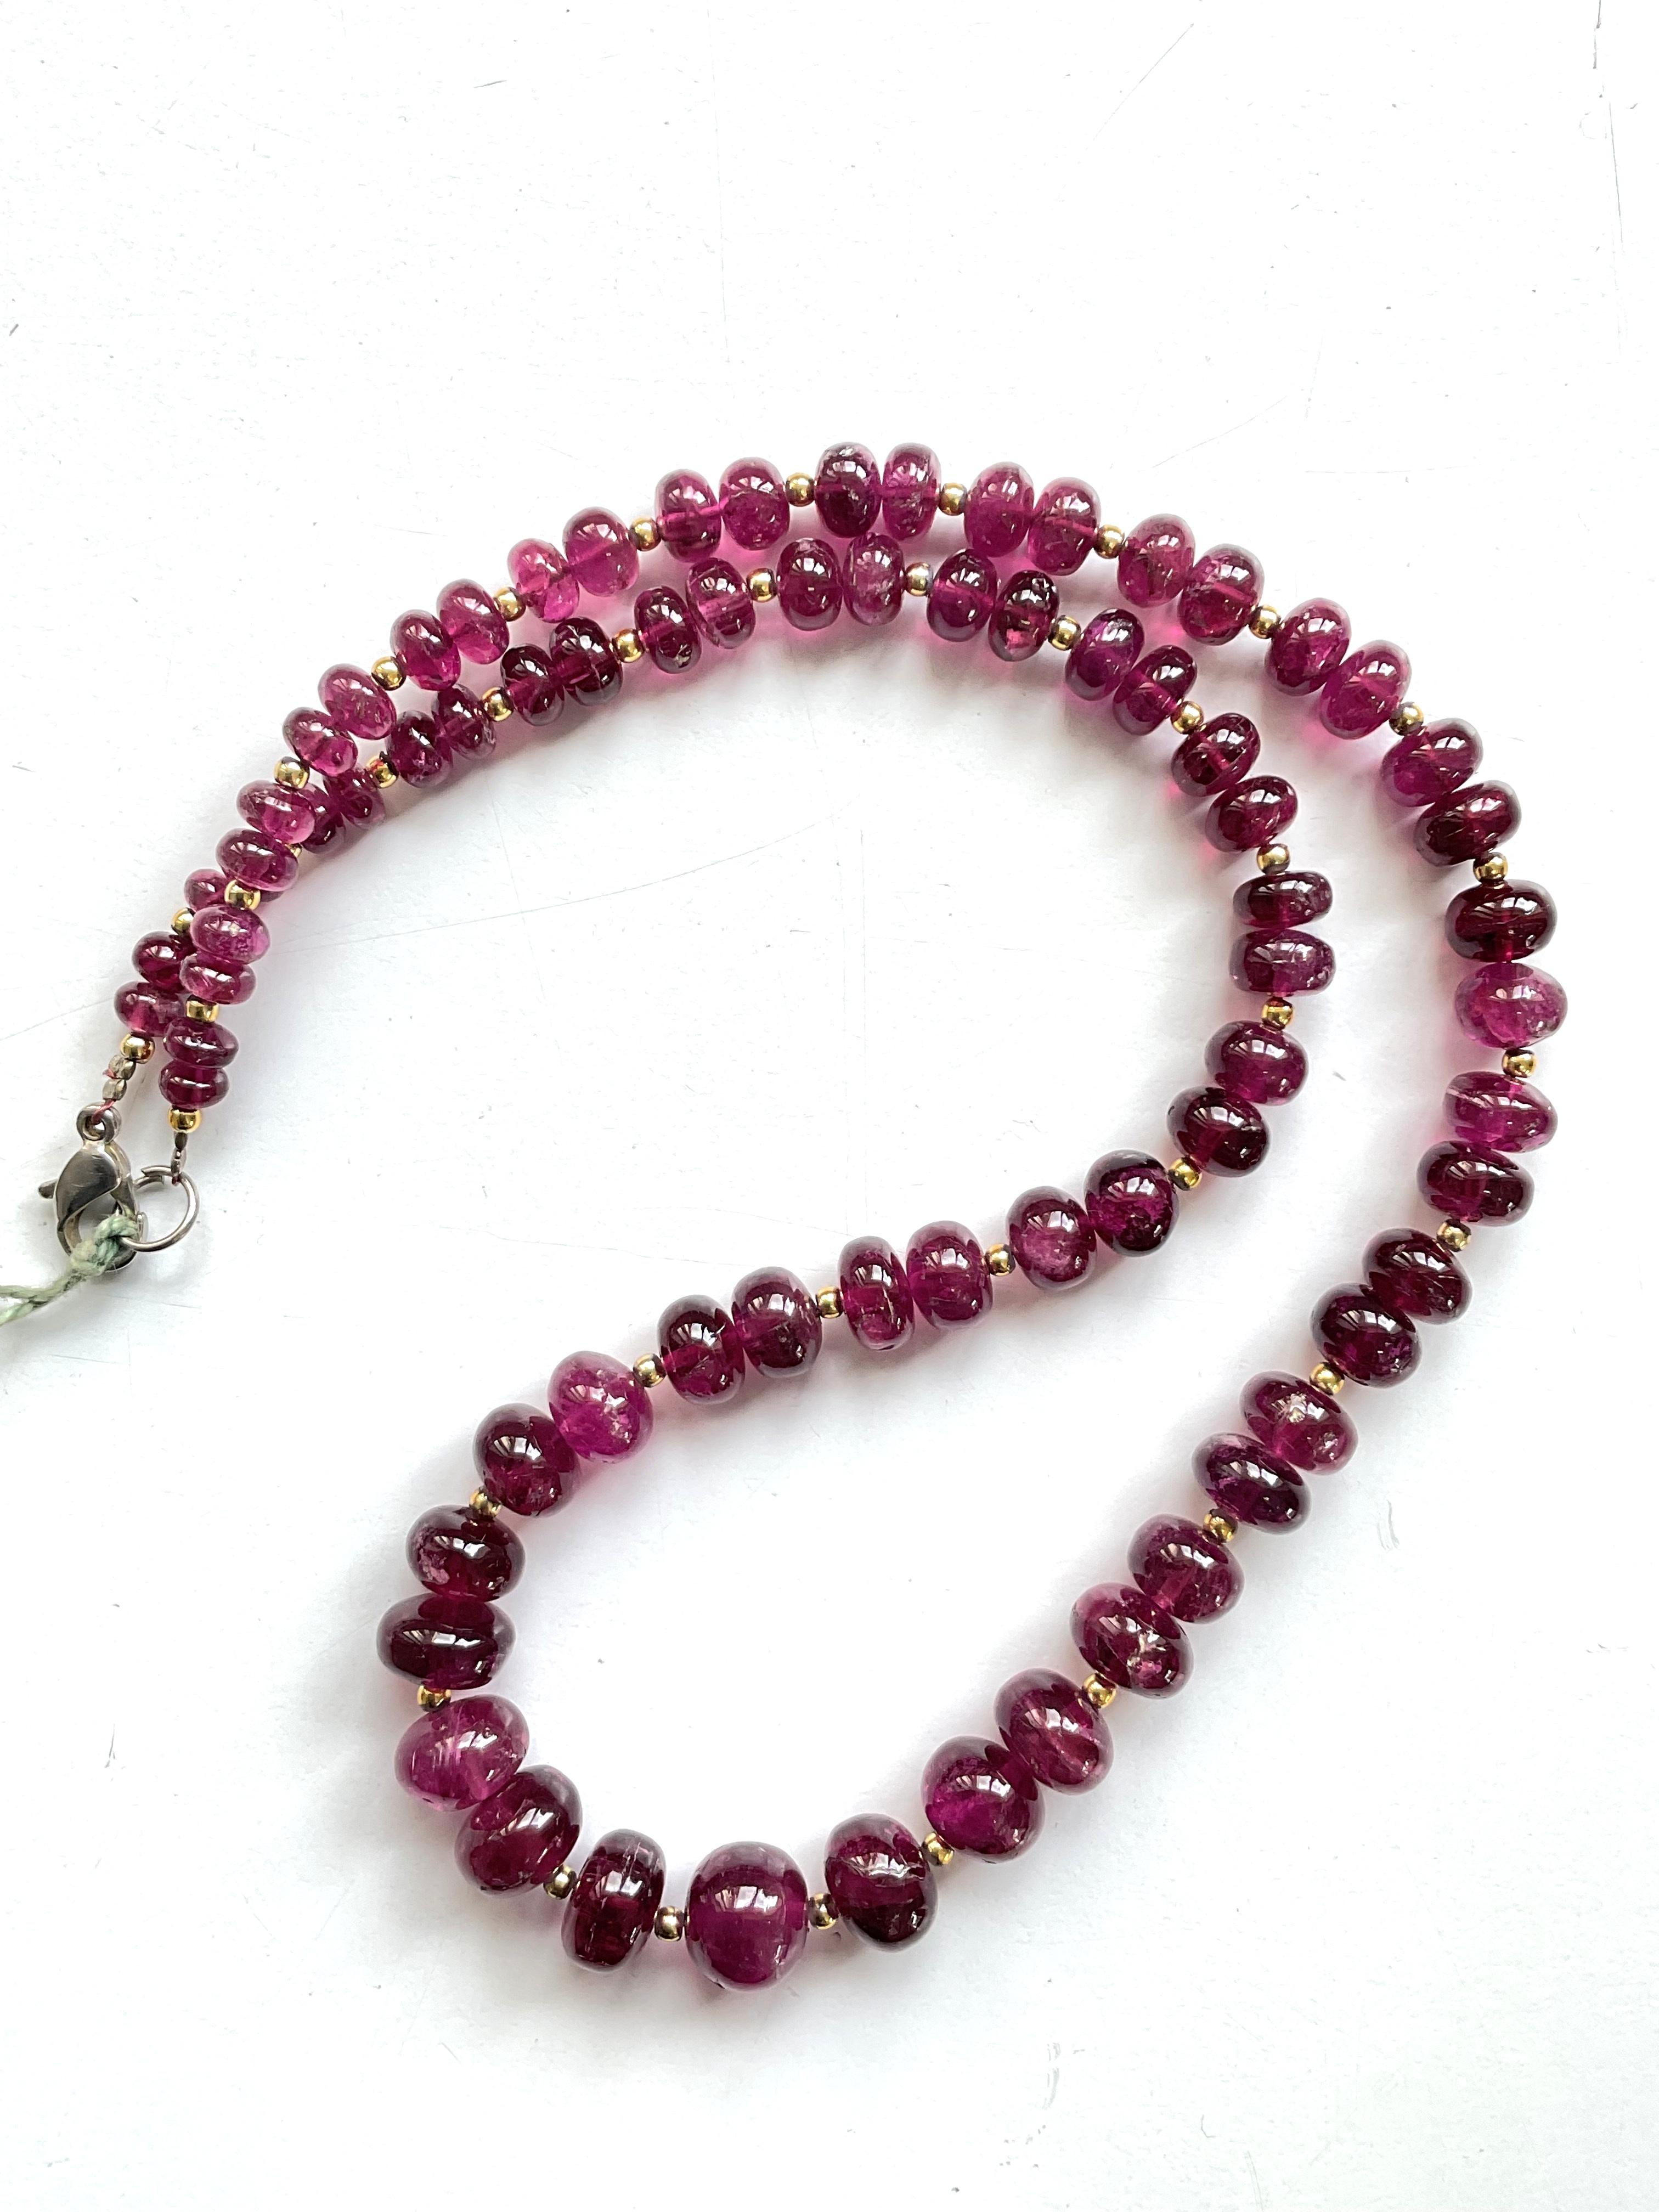 Women's or Men's 163.00 Carats Rubellite Tourmaline Plain Beads For Top Fine Jewelry Natural Gem For Sale